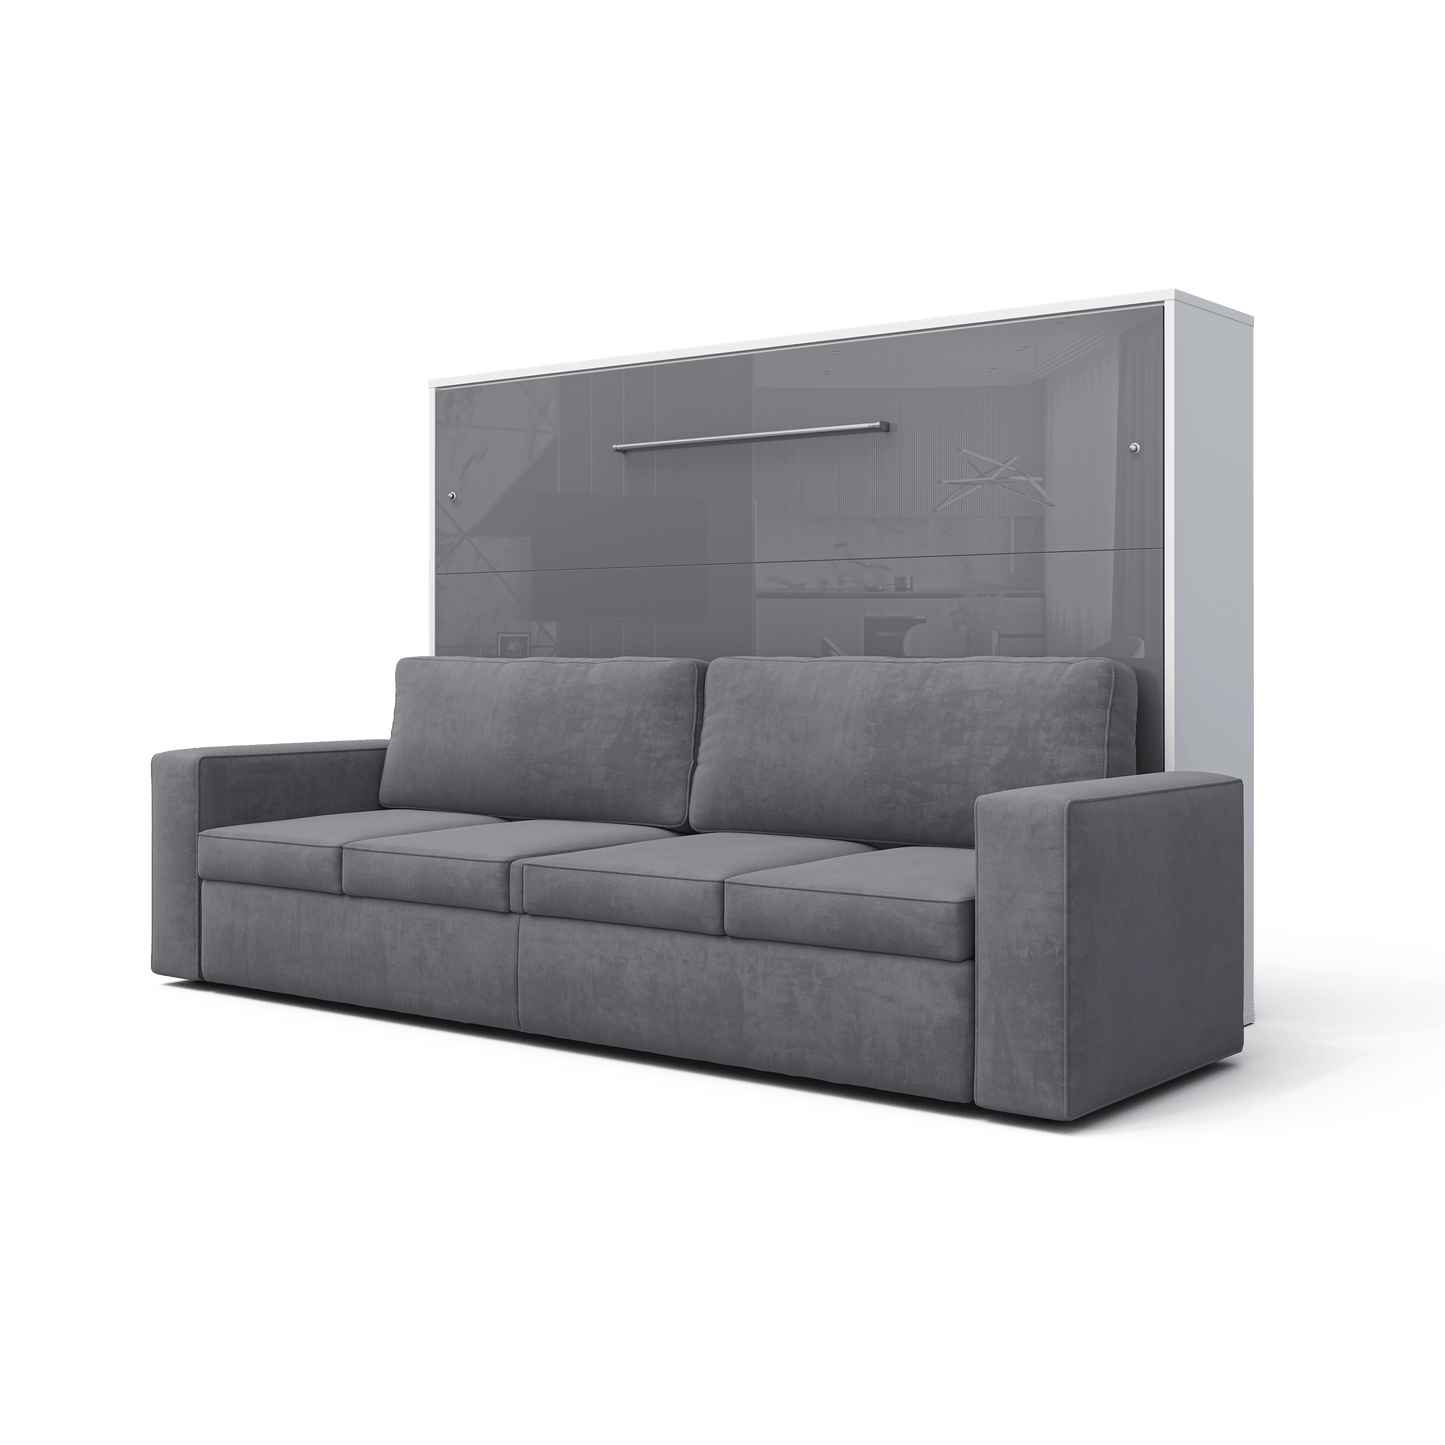 Maxima House Maxima House Horizontal Murphy bed INVENTO with a Sofa, European FULL XL IN004WG-G